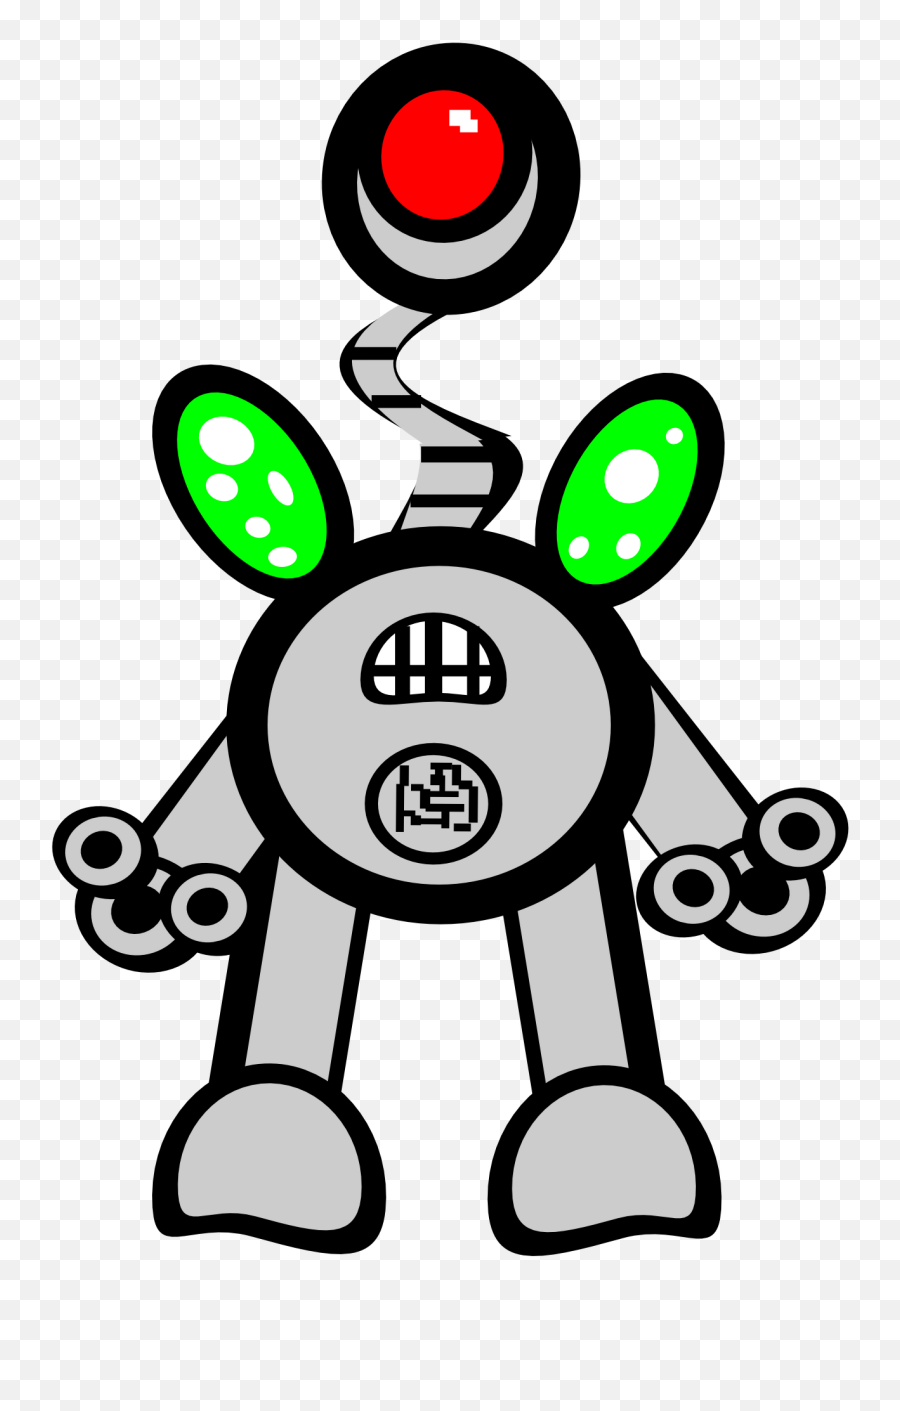 Clipart Of Robot Android Free Image - Robot Emoji,Future Clipart